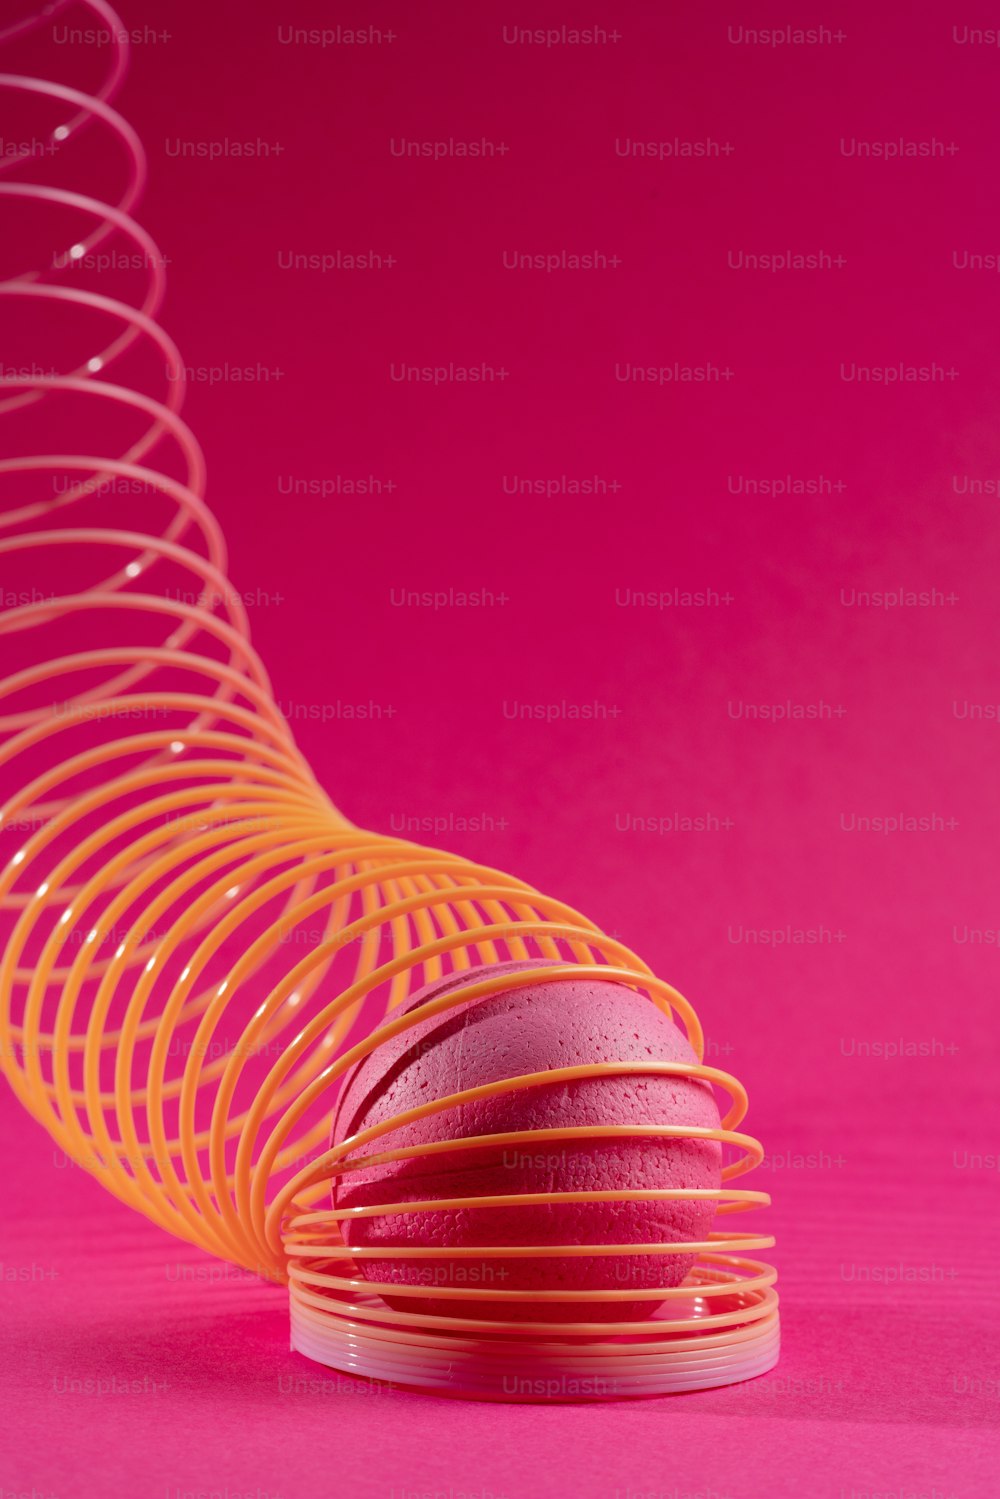 a pink and yellow object on a pink background